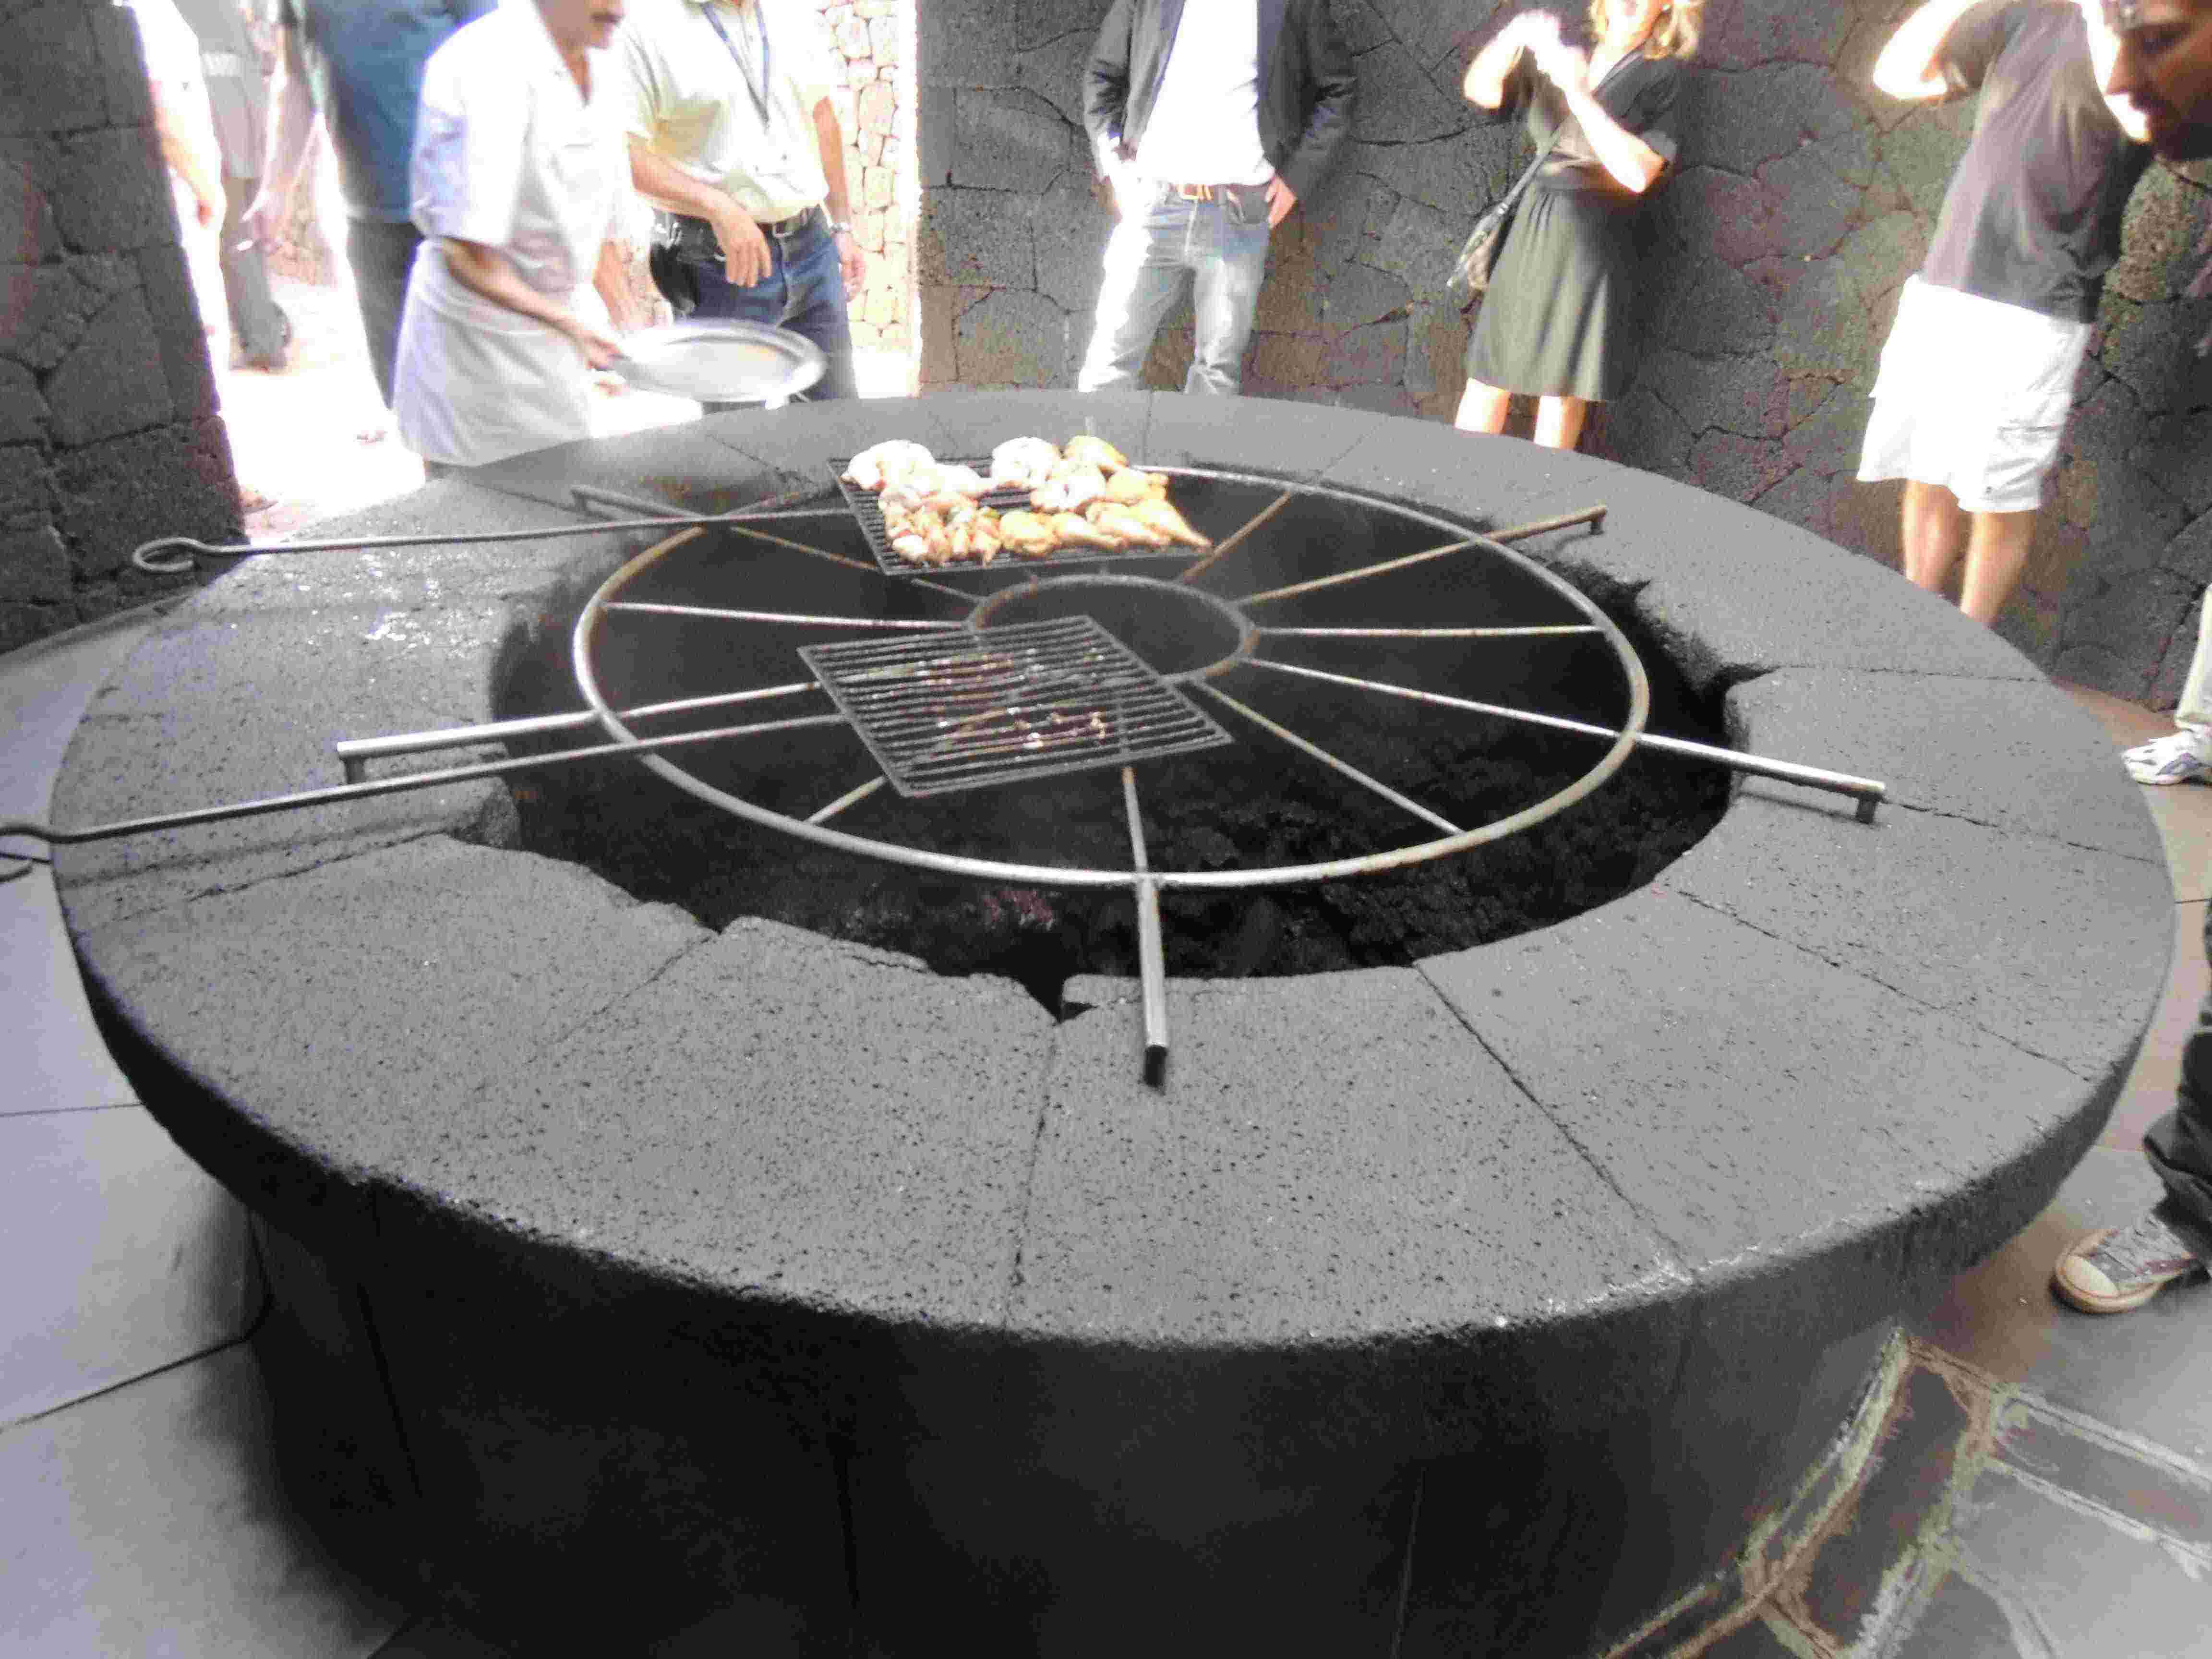 Tourists are shown how a grill near hot lava can cook chicken